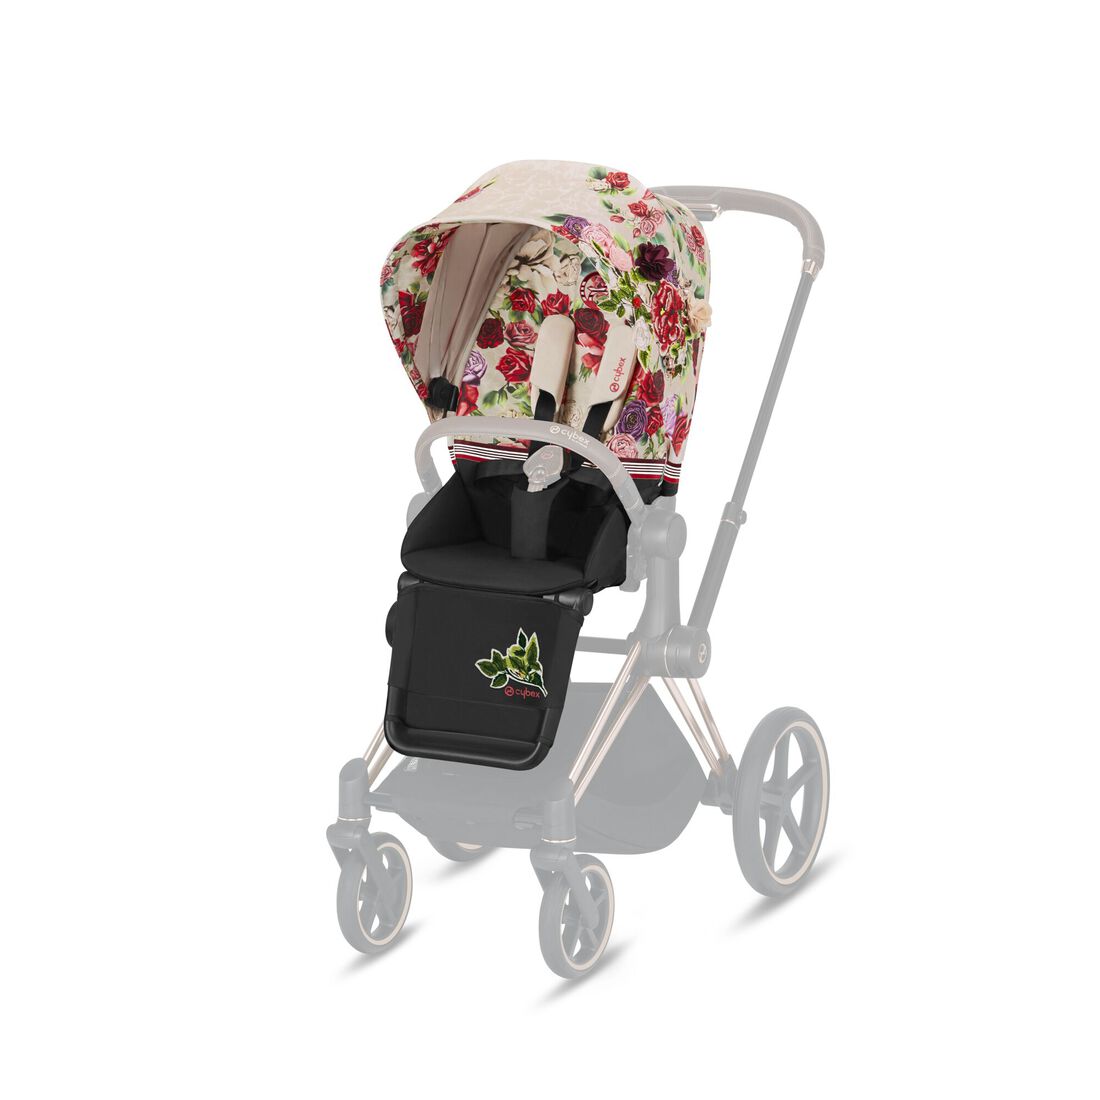 CYBEX Priam 3 Seat Pack - Spring Blossom Light in Spring Blossom Light large numero immagine 1